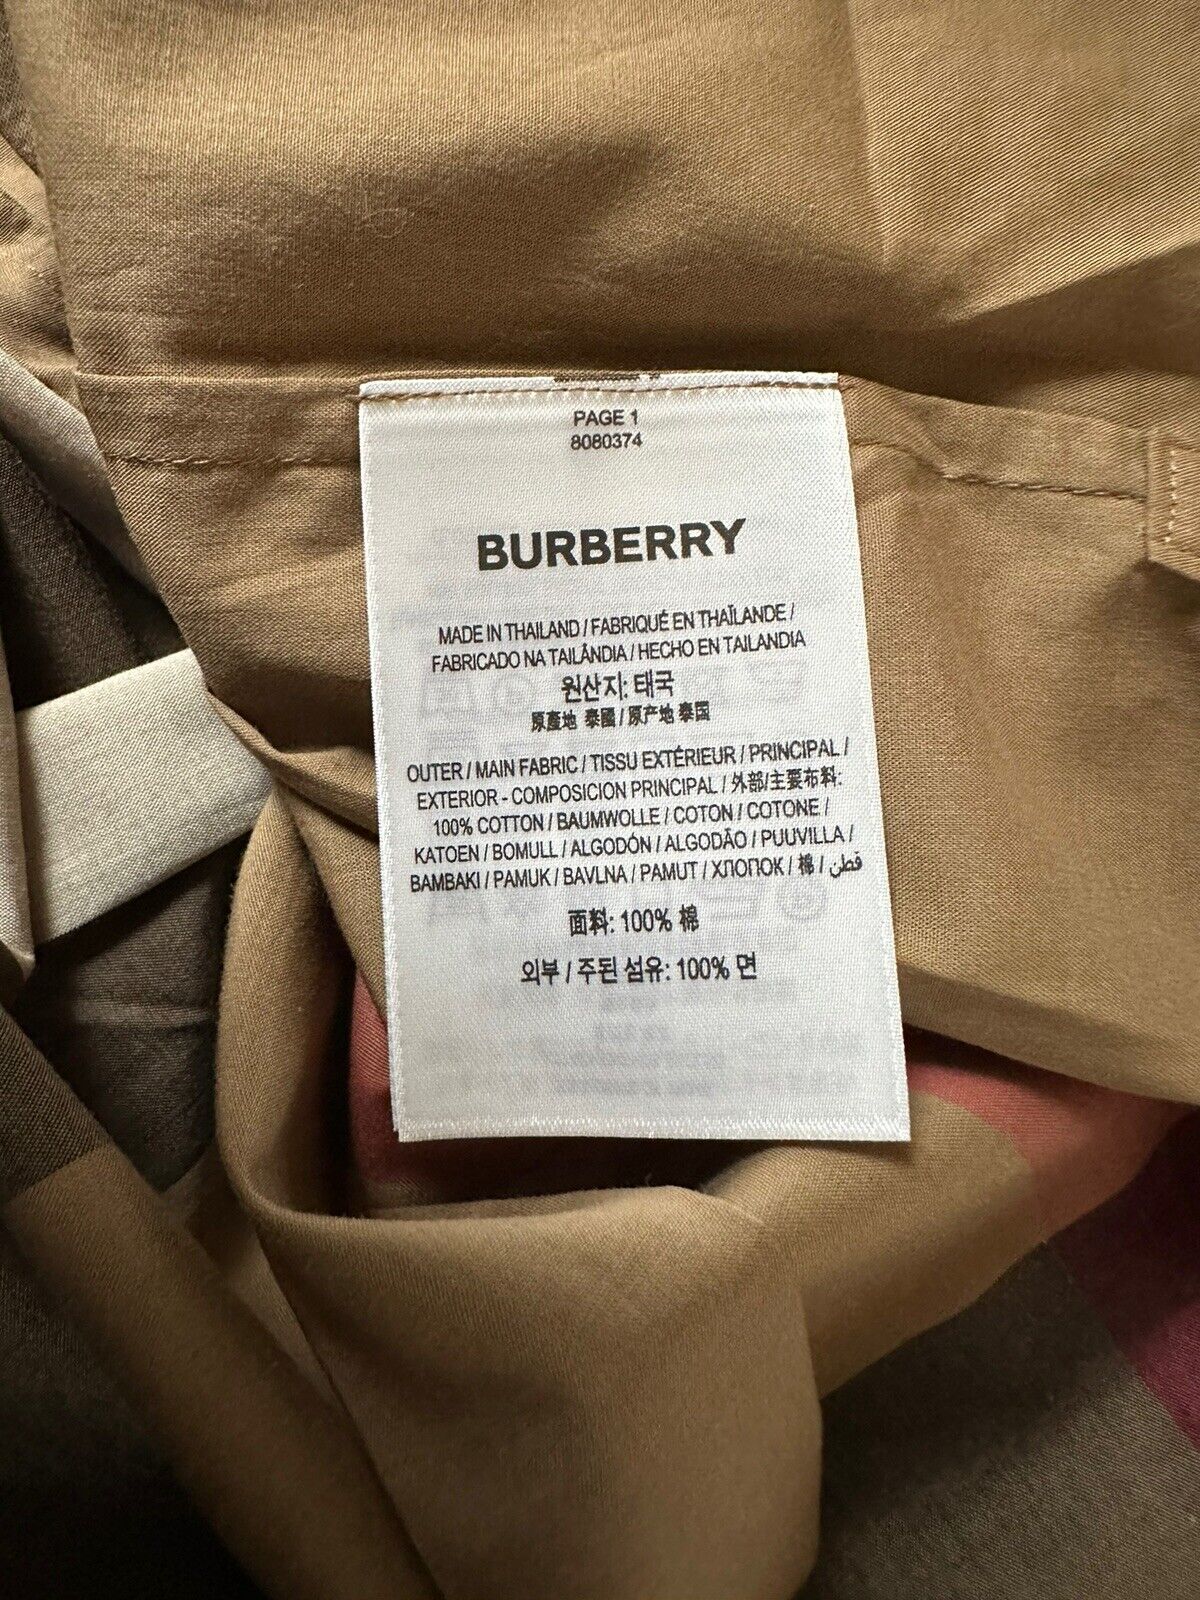 Burberry Kelsy Women’s Toupe Brown Check Dress 4 US (38 Euro) 8080374 NWT $760